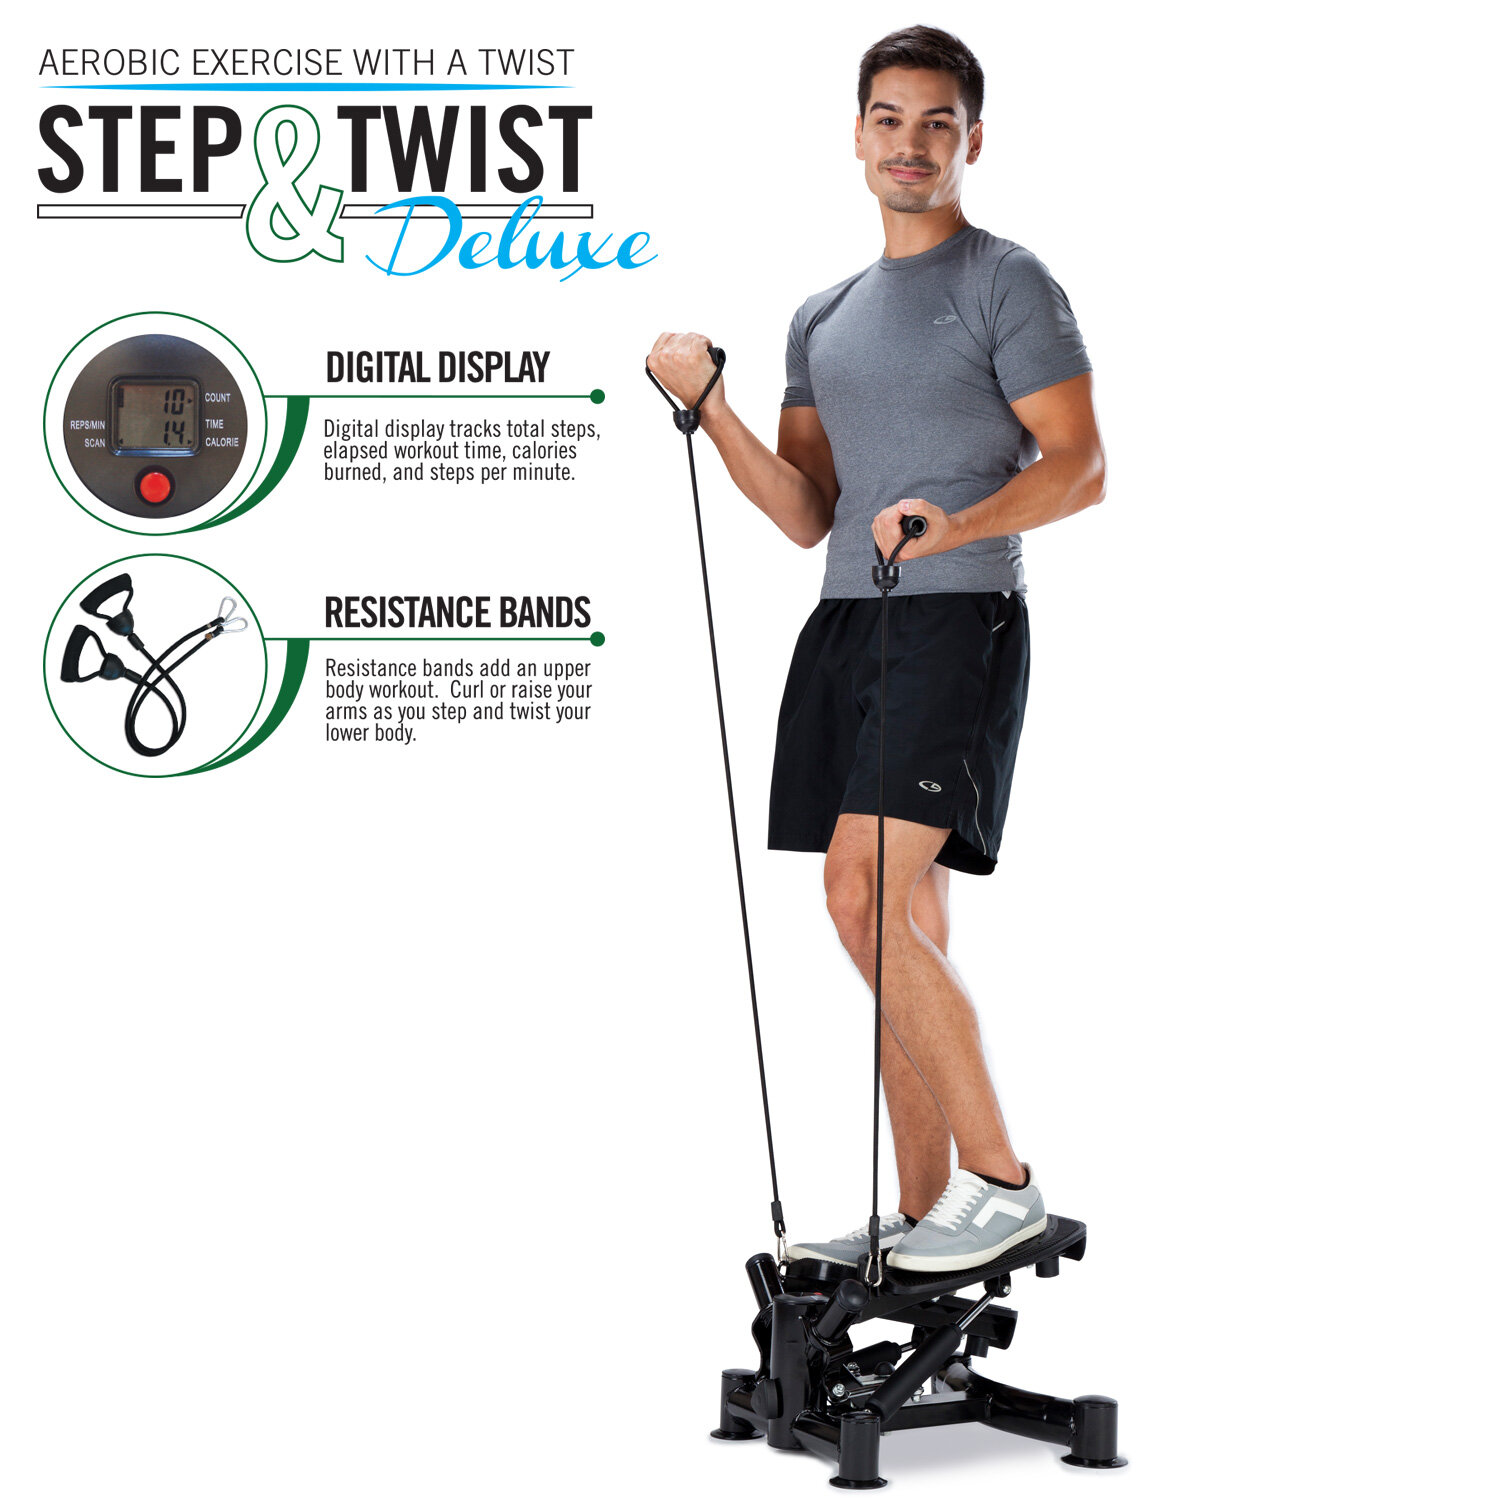 Twist Stepper Body Workout Machine Aerobic Fitness Exercise With LCD Display 